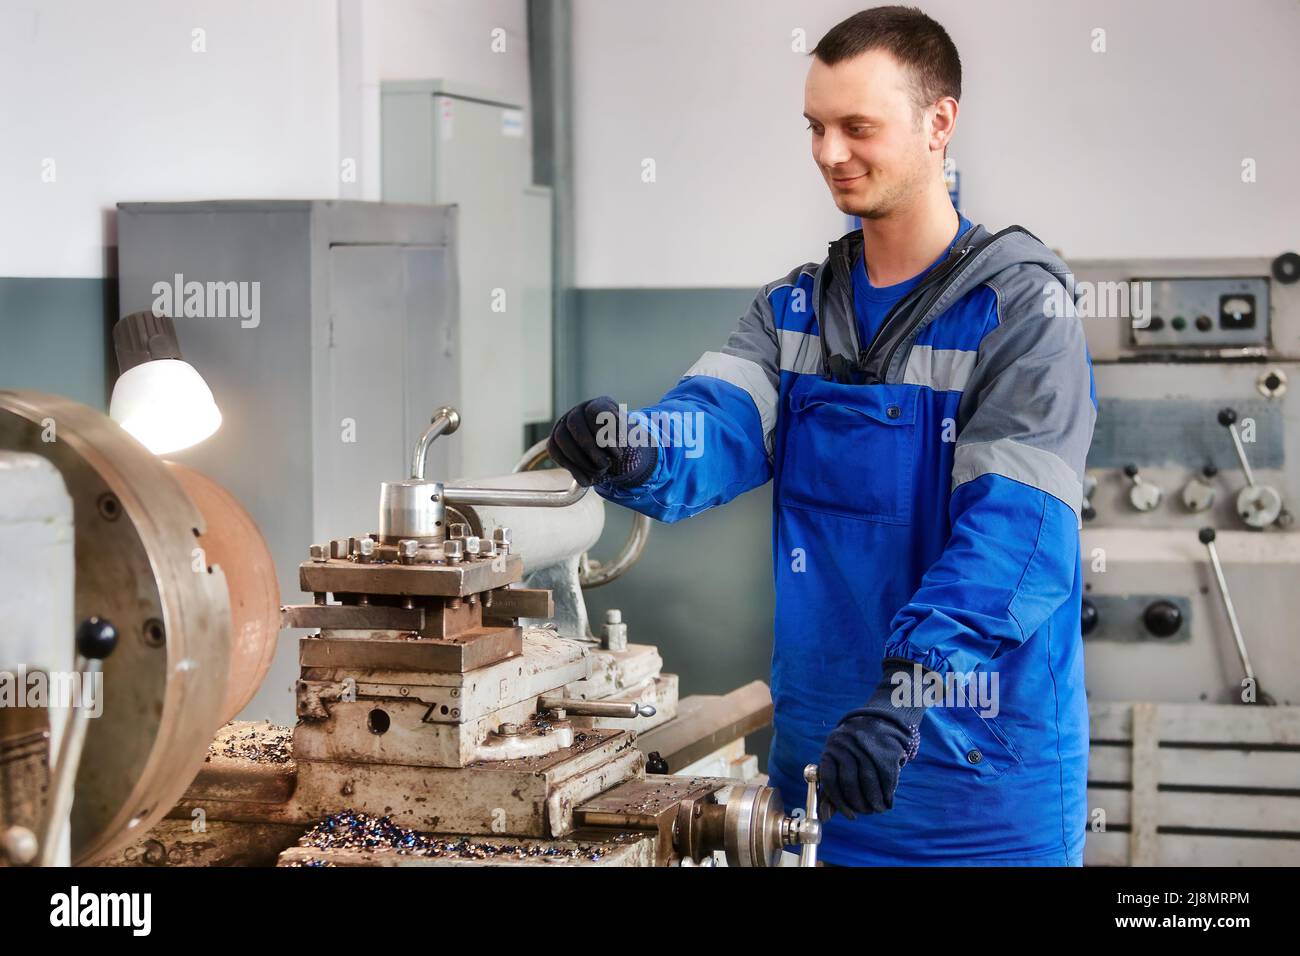 Young turner in overalls works on lathe in workshop. Authentic scene workflow. Caucasian worker recycles metal parts. Stock Photo